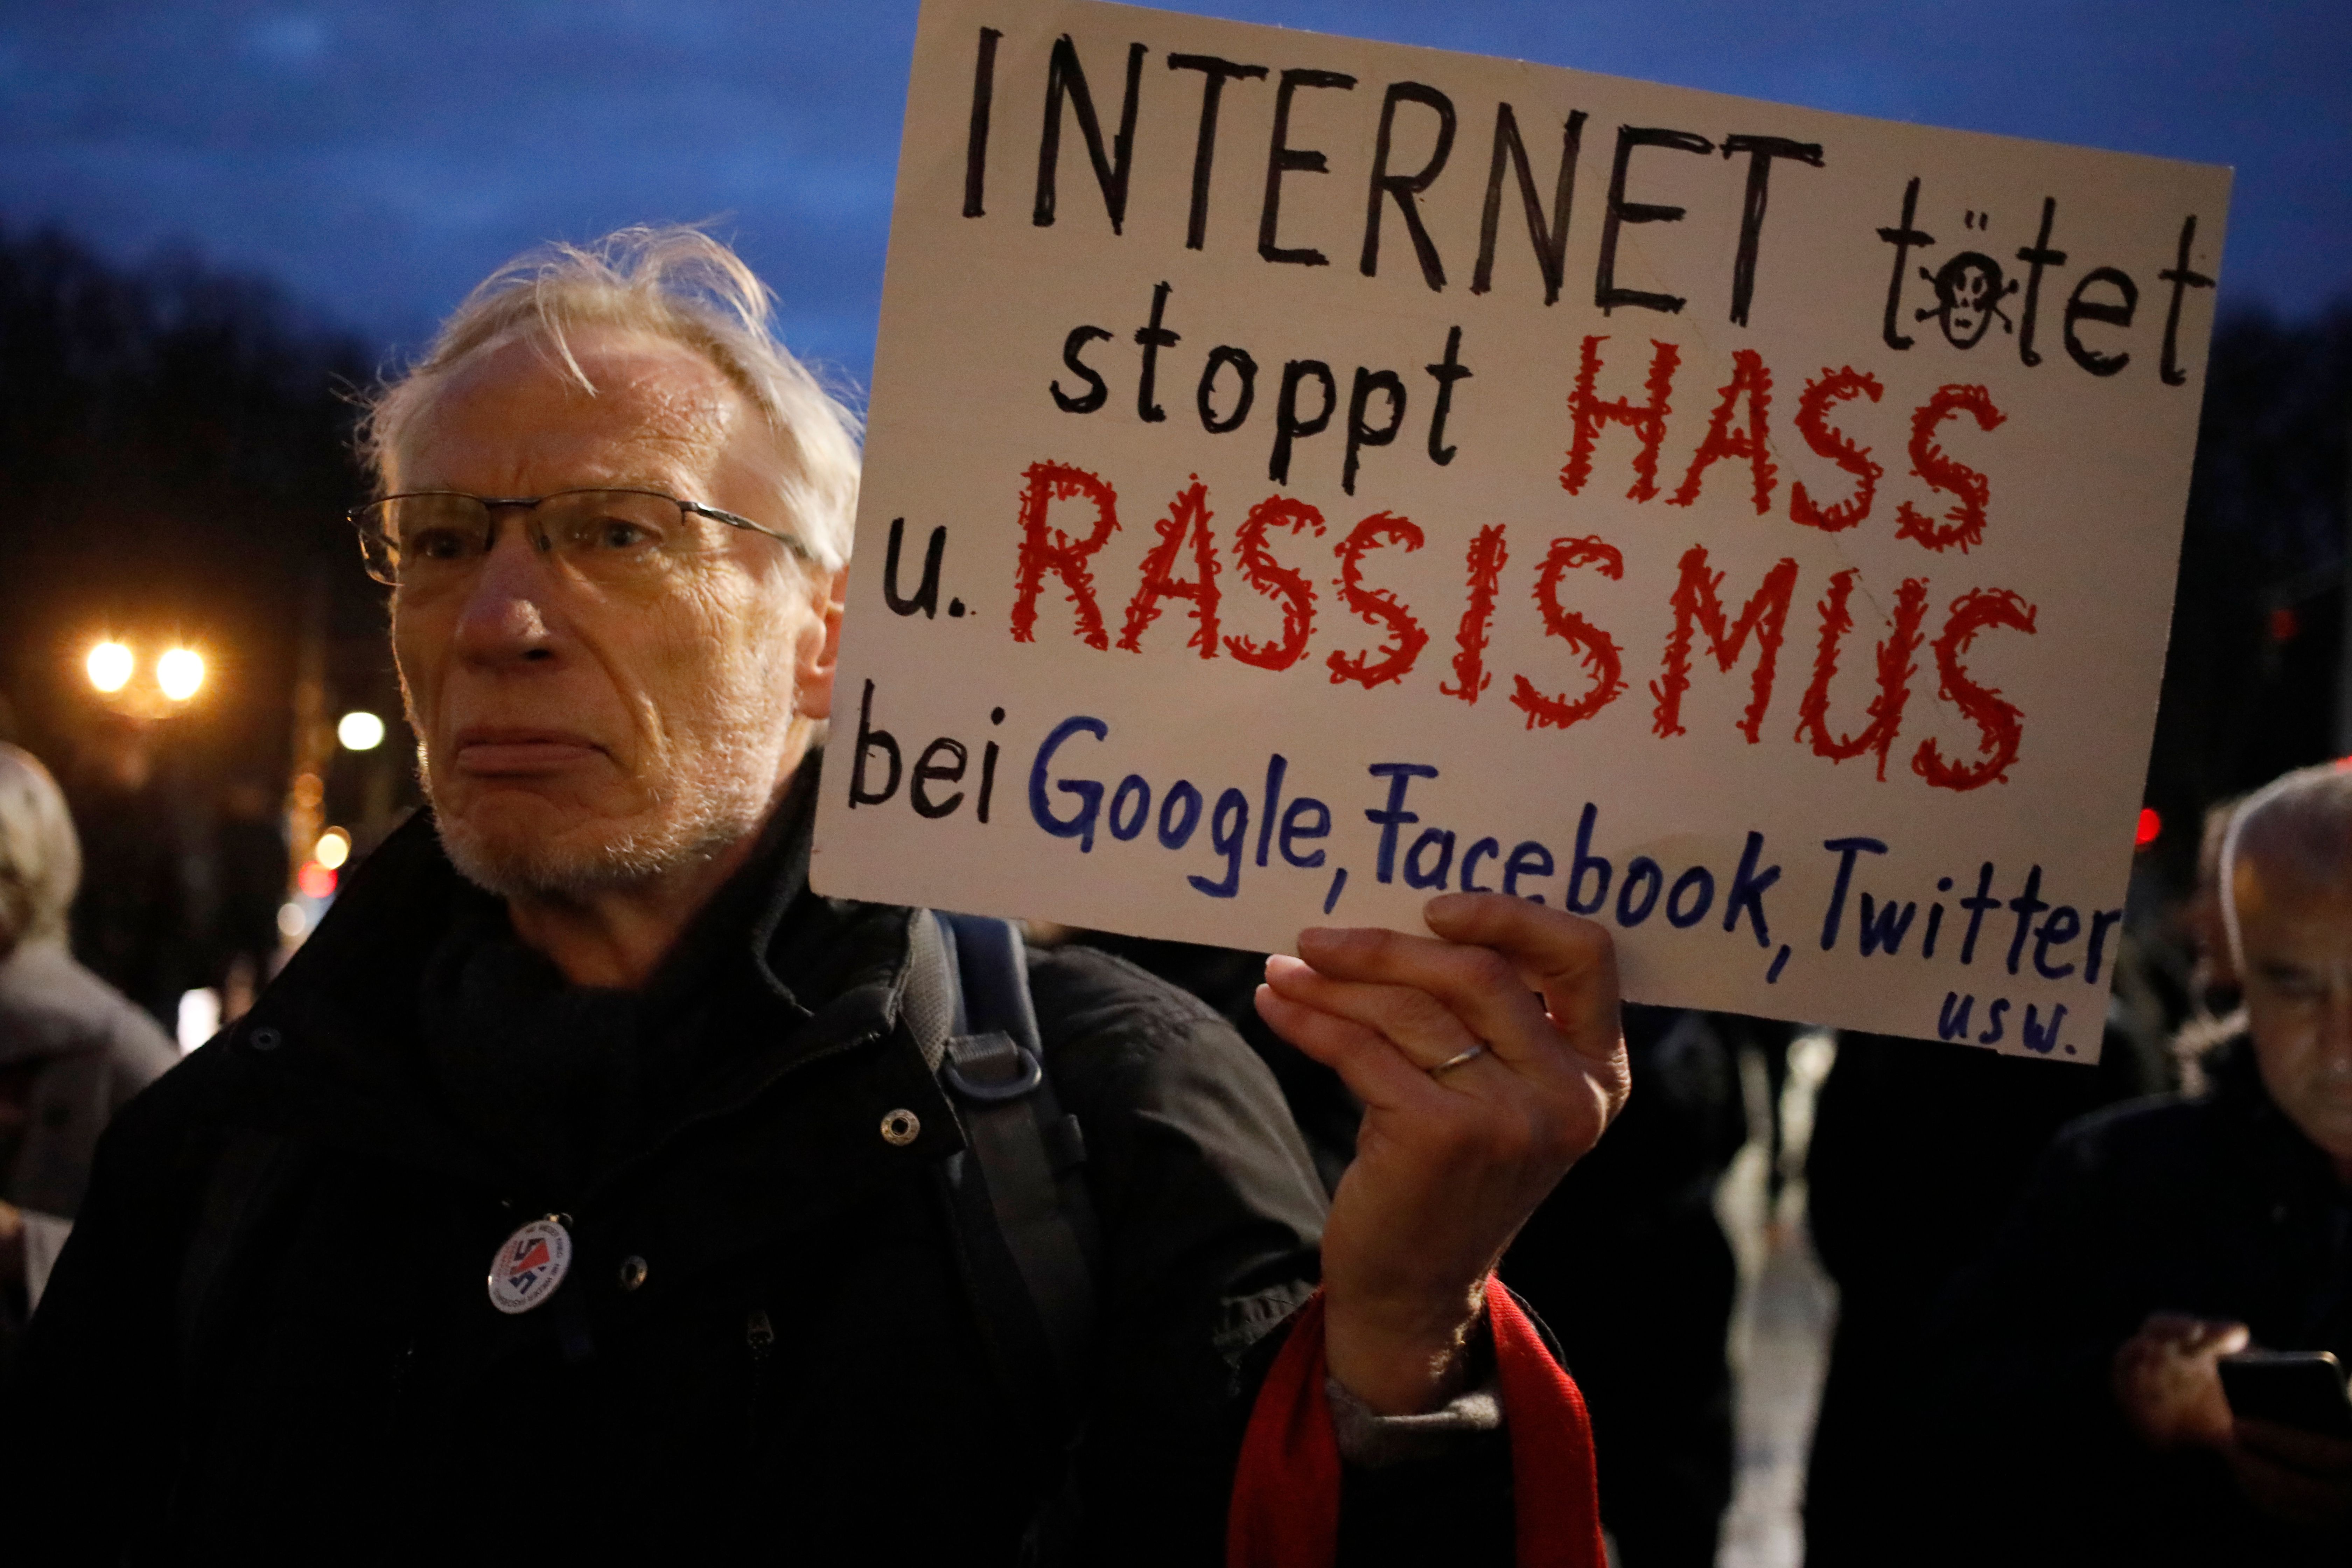 A man holds a poster reading "Internet kills - stop hate and racism at Google, Facebook, Twitter etc" during a vigil in solidarity with the Hanau shooting victims and their families, in front of Brandenburg Gate in Berlin on Thursday, February 20, a day after at least nine people were killed in two shootings.